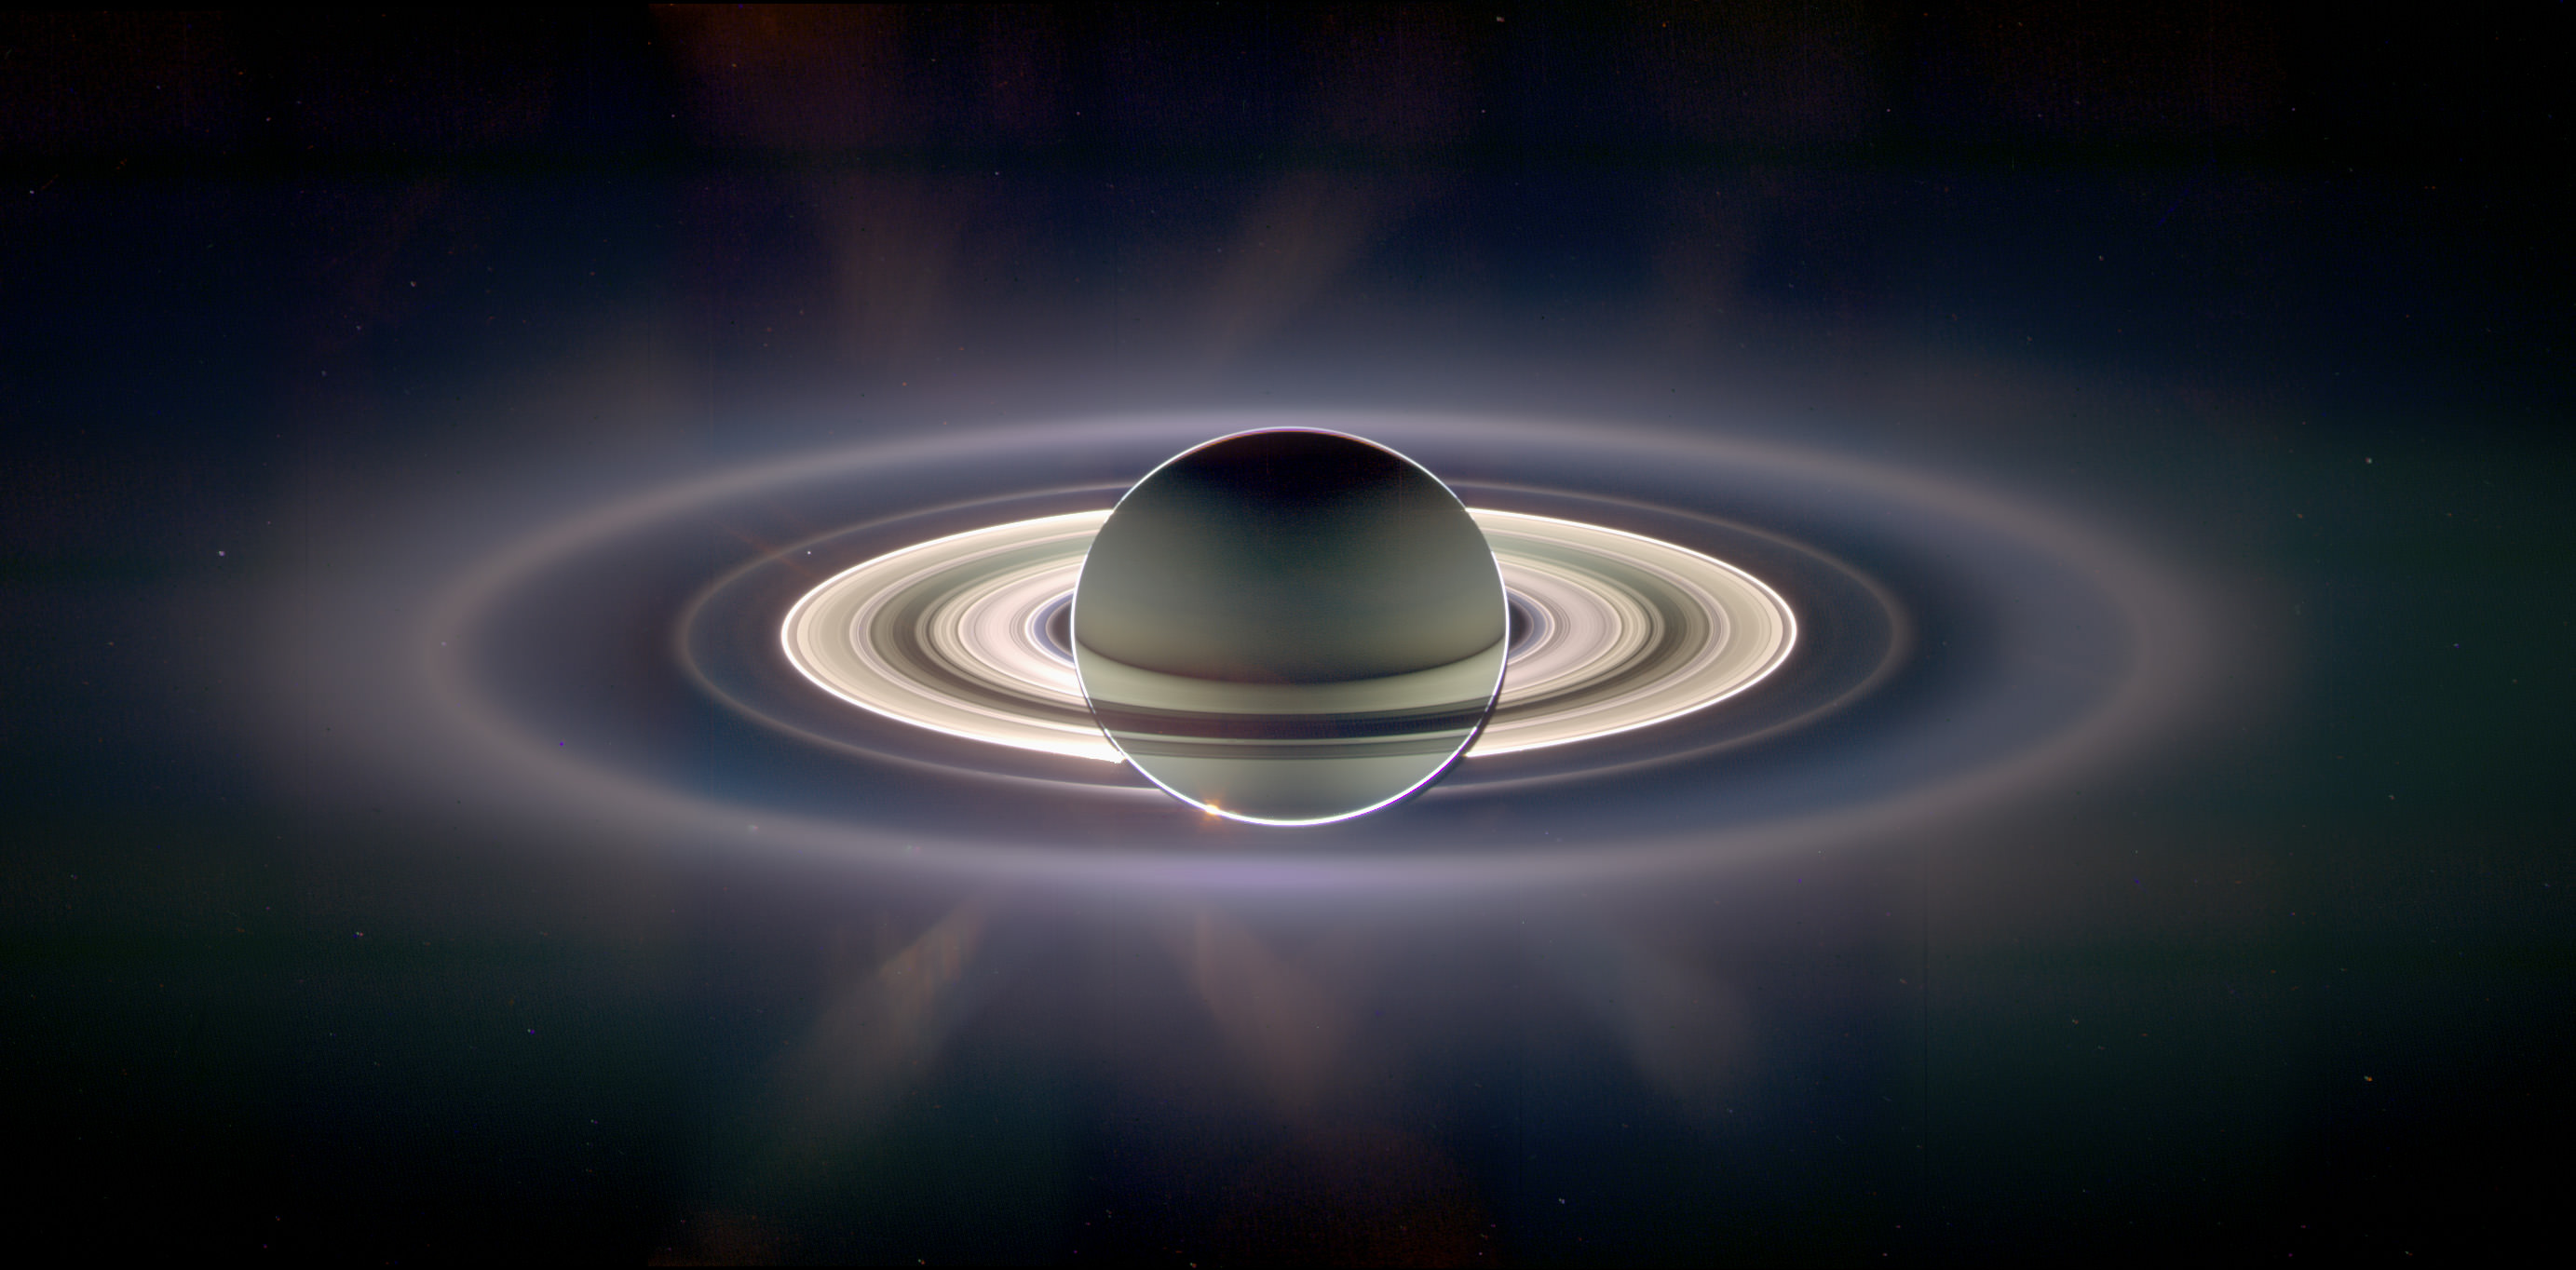 More Stunning Images and Discoveries Ahead: Cassini Mission Extended to